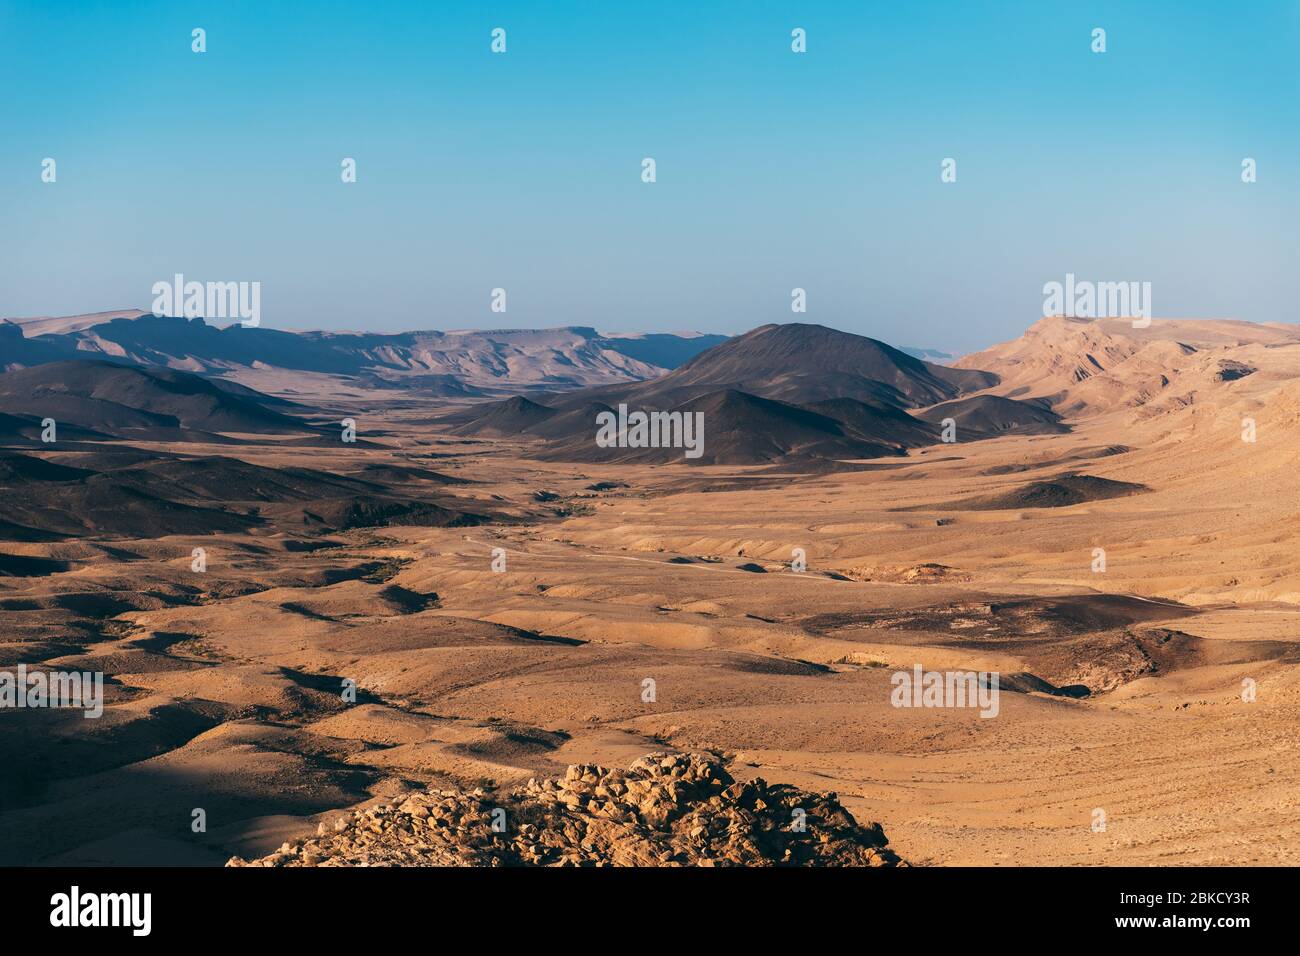 Makhtesh ramon crater landscape in Israel's Negev Desert. Near to Mizpe Ramon city on south Israel. Sand dunes in gold and black. Beautiful blue sky i Stock Photo